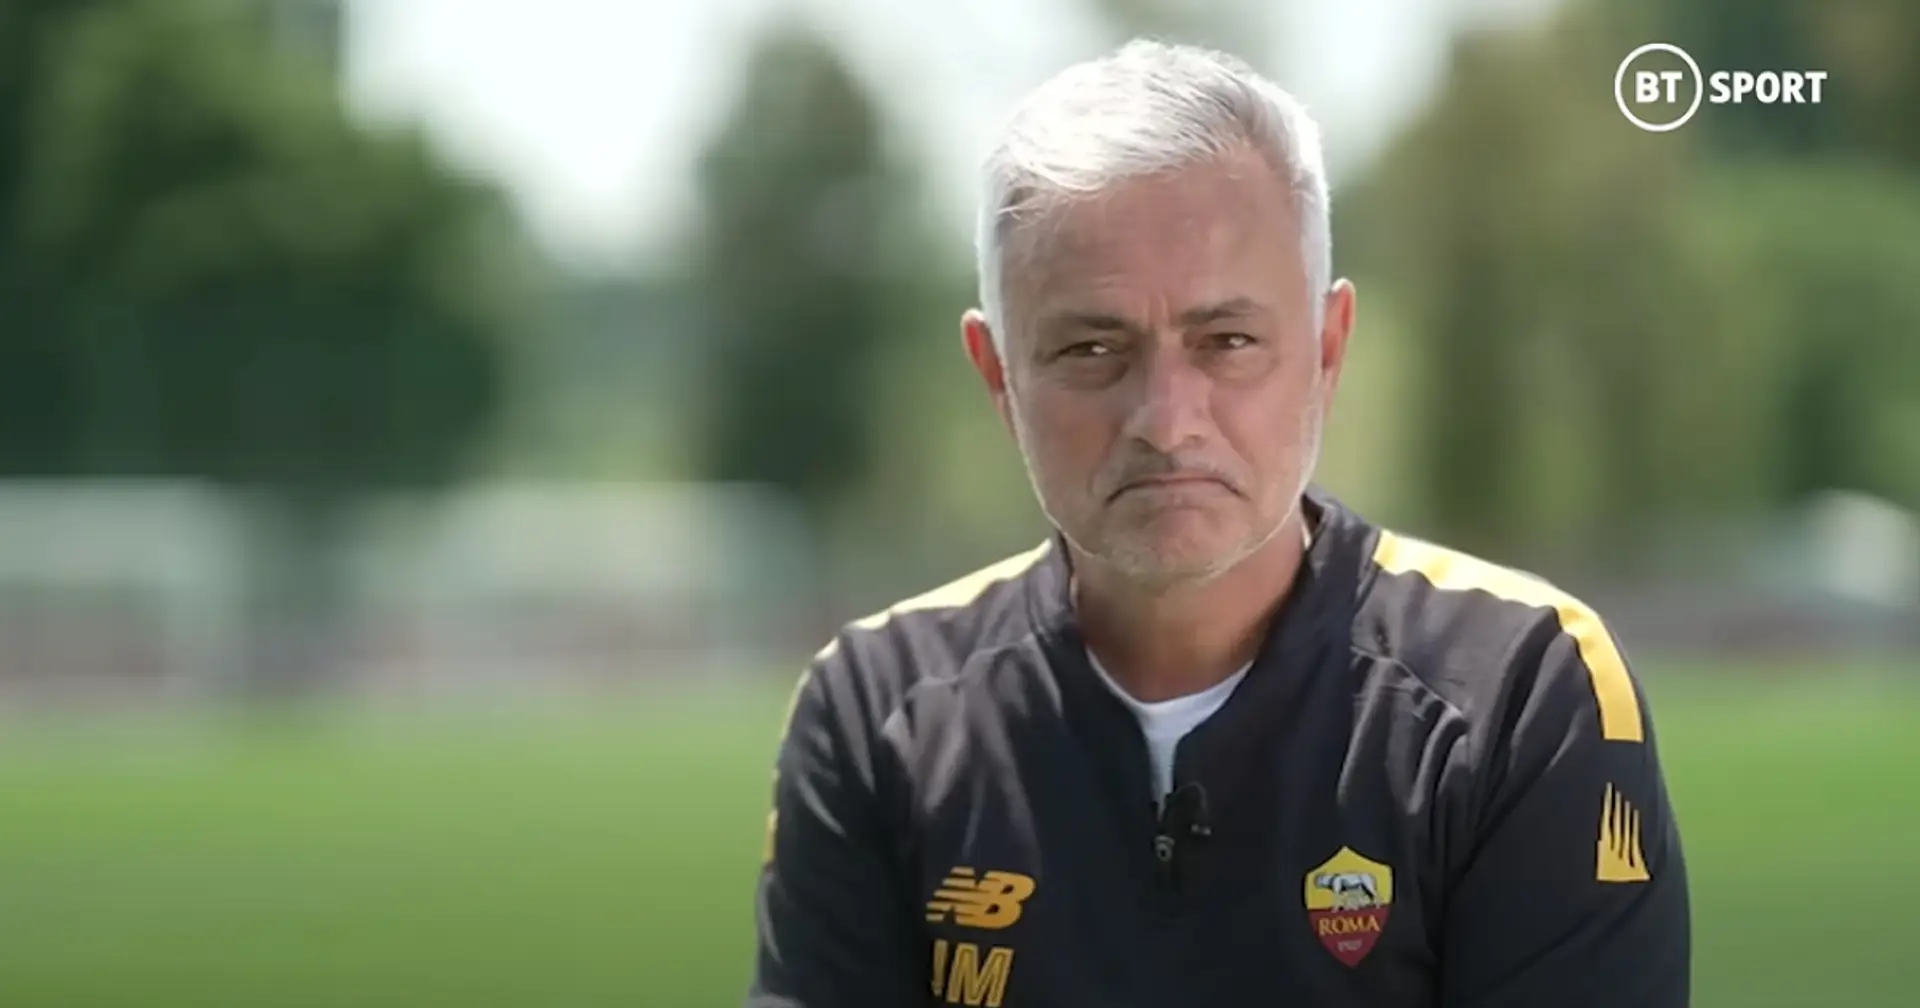 Jose Mourinho explains why he rejected 2 offers from Saudi Arabia to stay at AS Roma